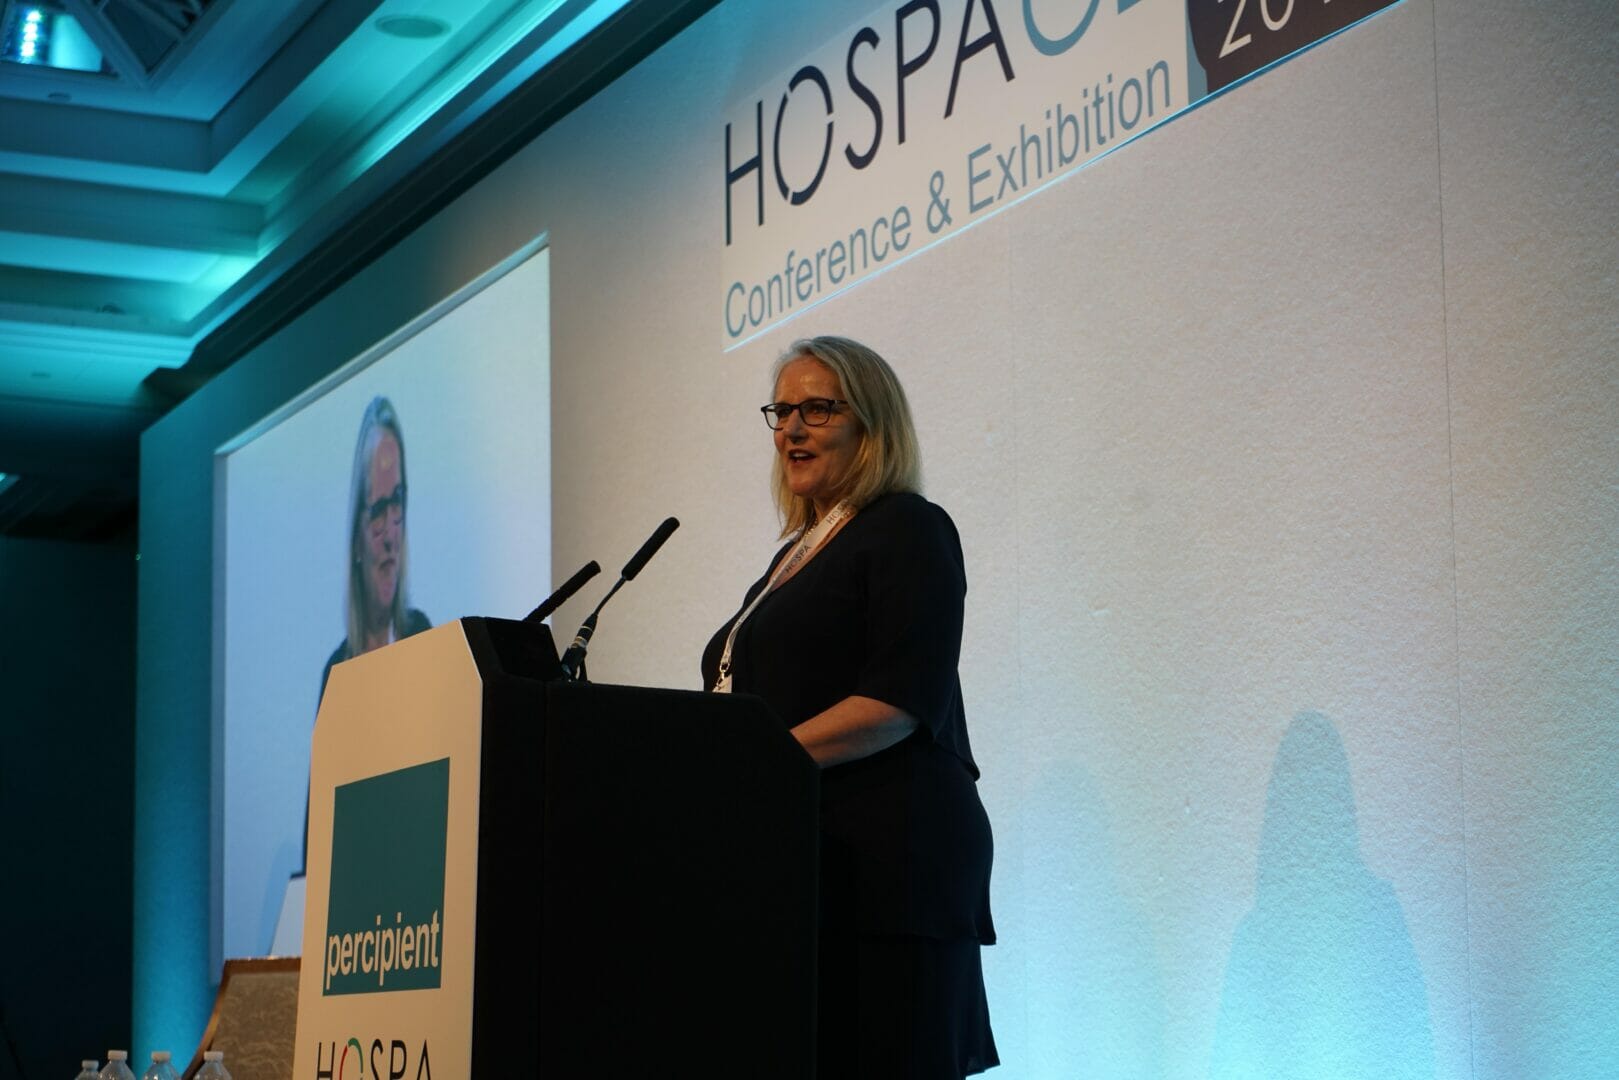 Inspirational hospitality leaders recognised at annual awards gala dinner @HOSPAtweets